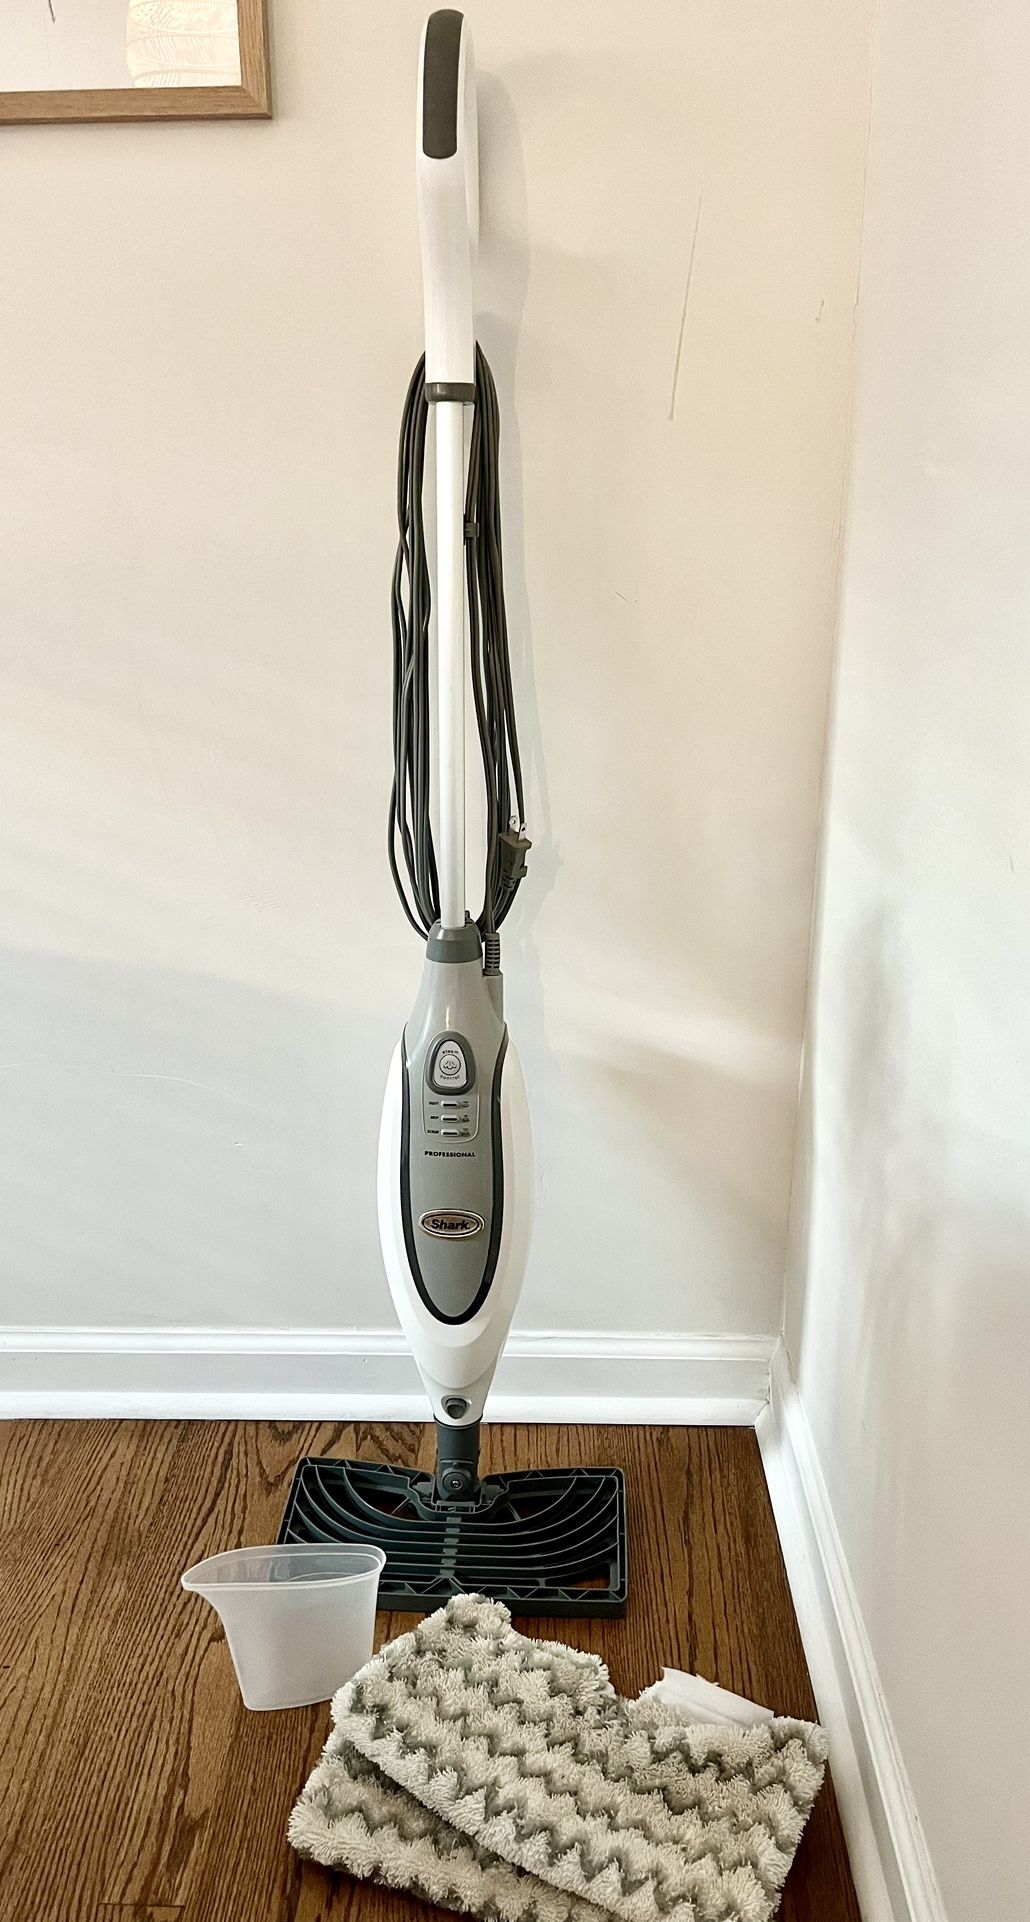 Shark steam mop with 2 washable pads - great condition!